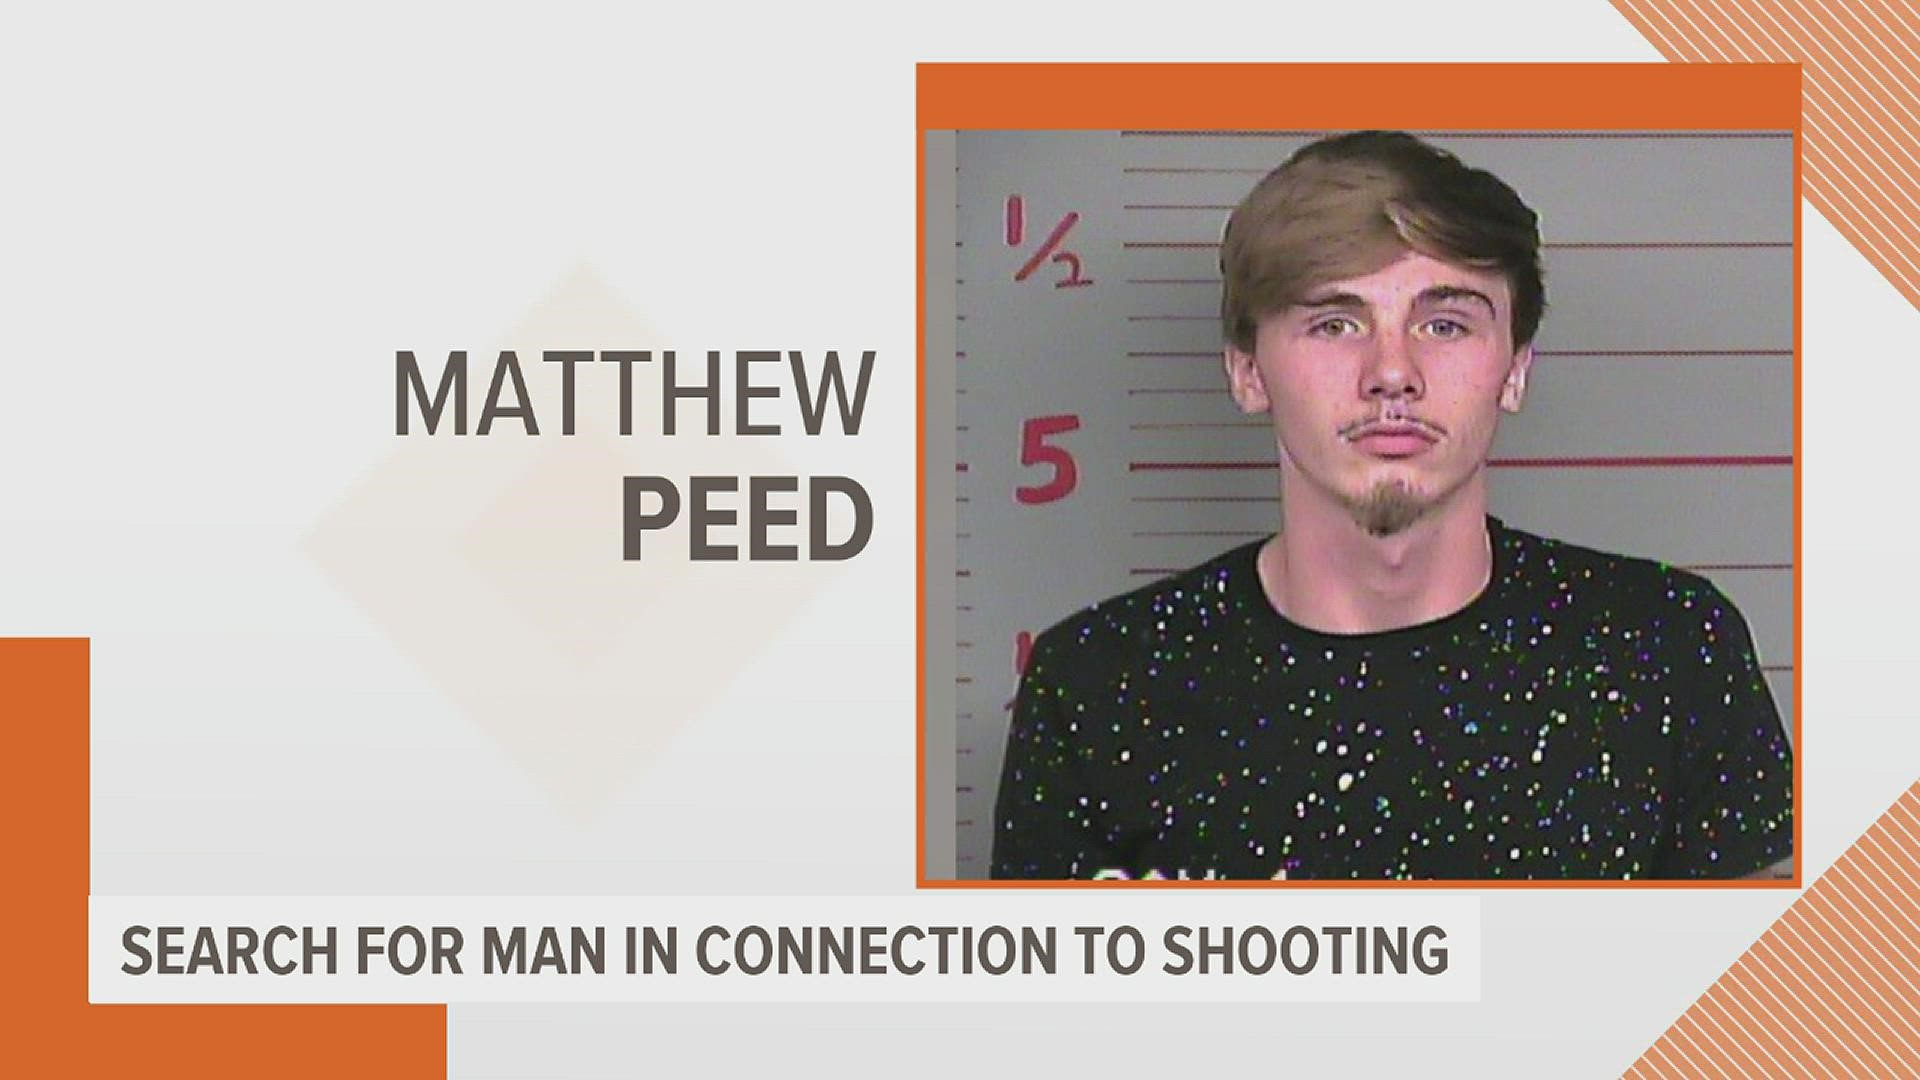 Matthew Peed is charged with discharging a firearm causing injury and aggravated battery.